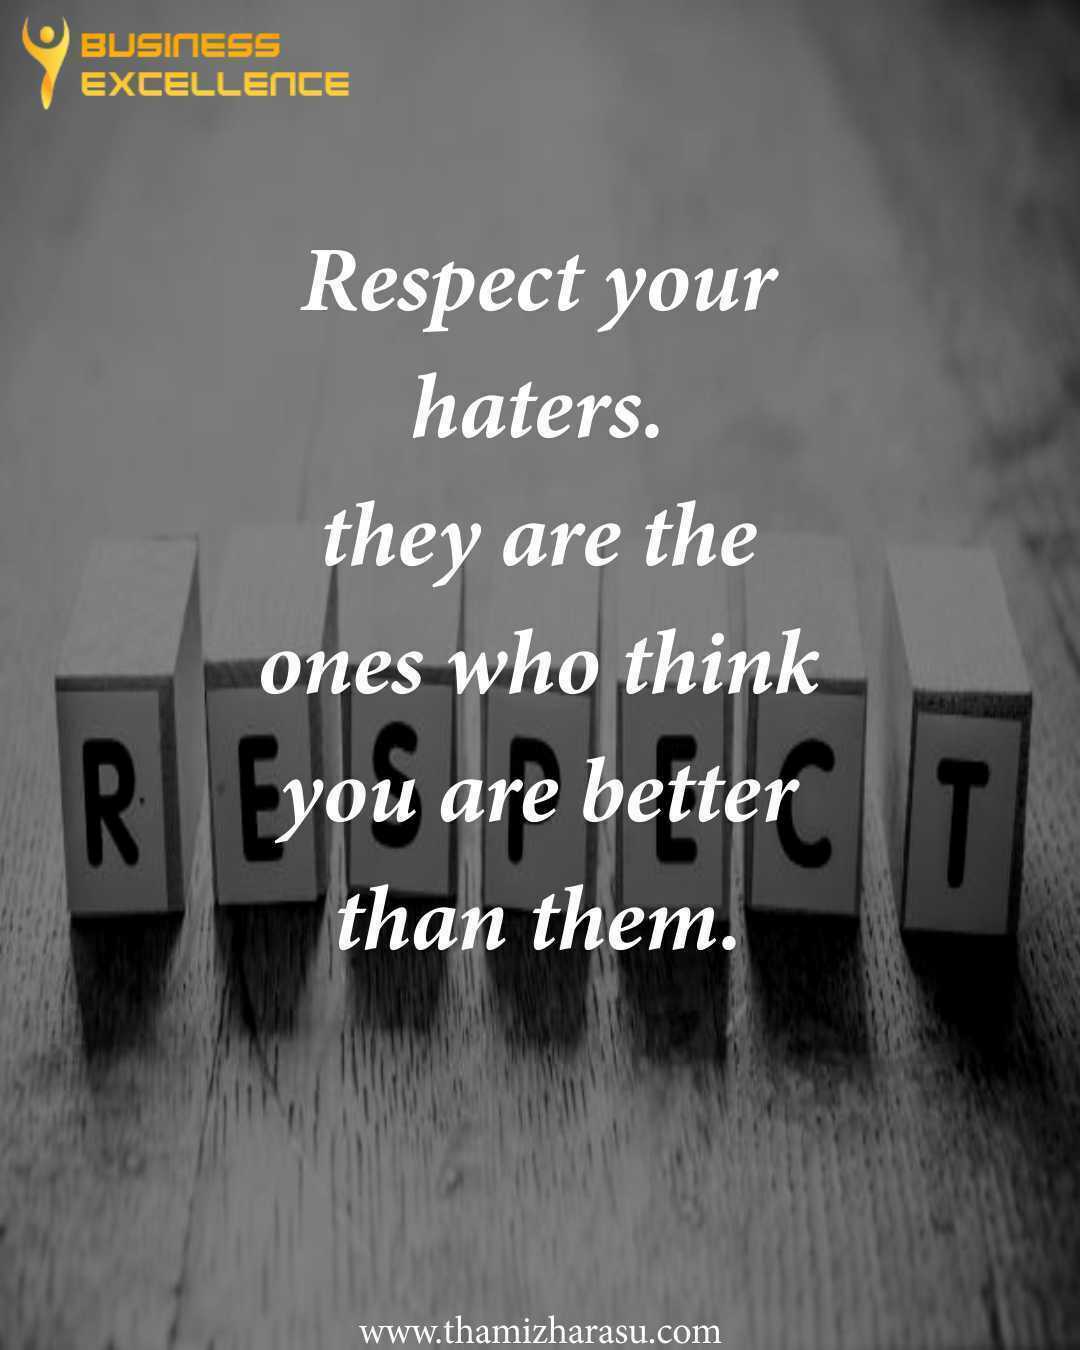 respect your haters,motivational quotes,quotes,success,believe,achieve,life,people,leadership,discipline,set goals,opportunities,positive,action,attitude,optimism,learning,happiness,dream,ambition,comfort zone,failure,patience